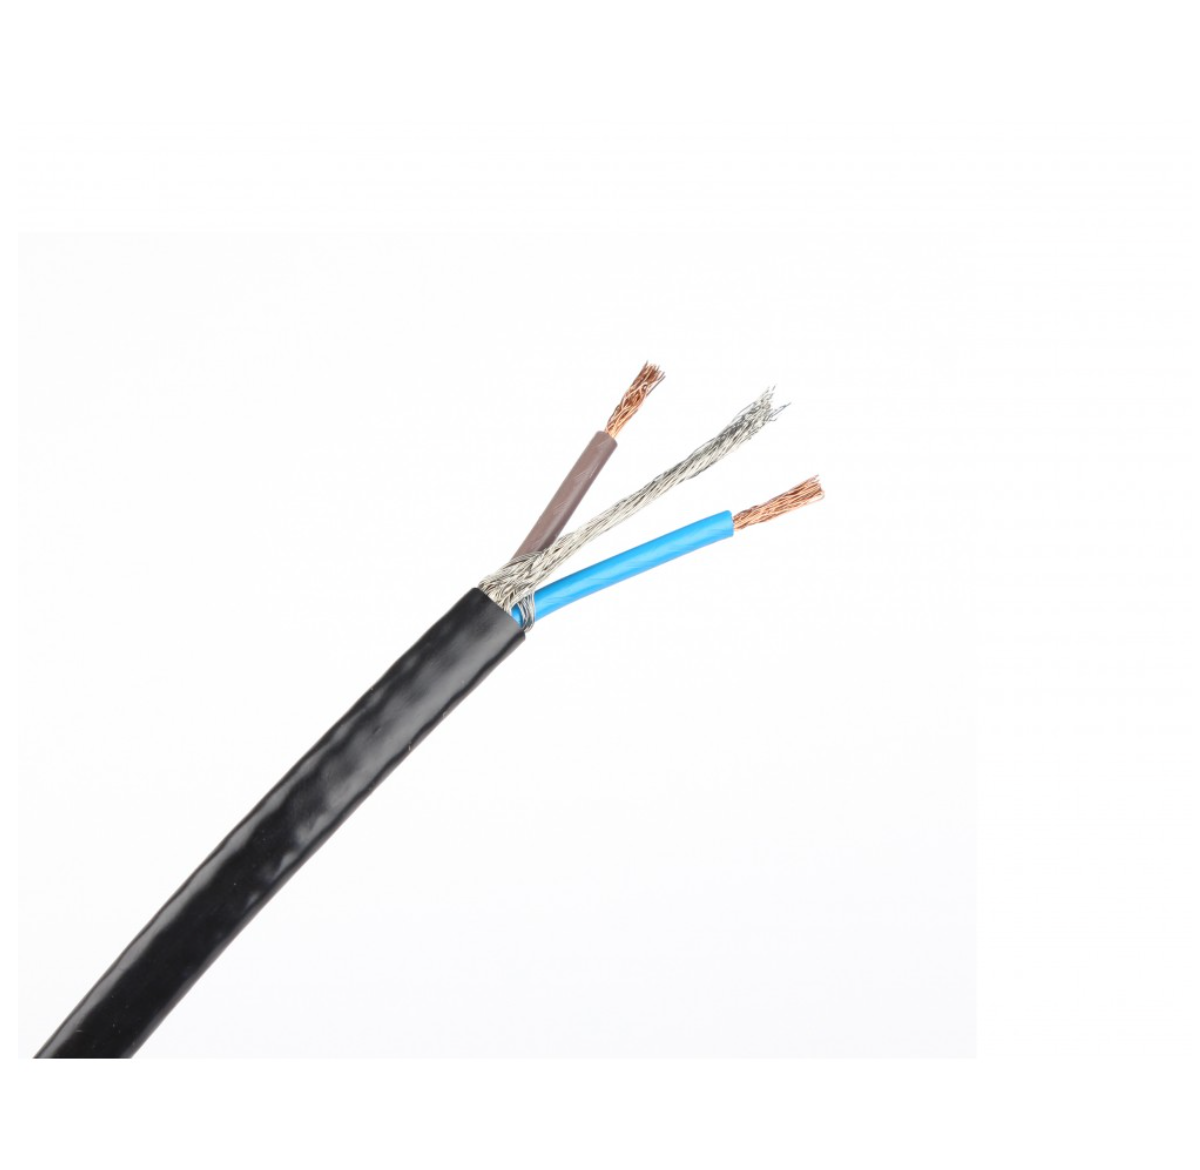 Heating cable - 240m